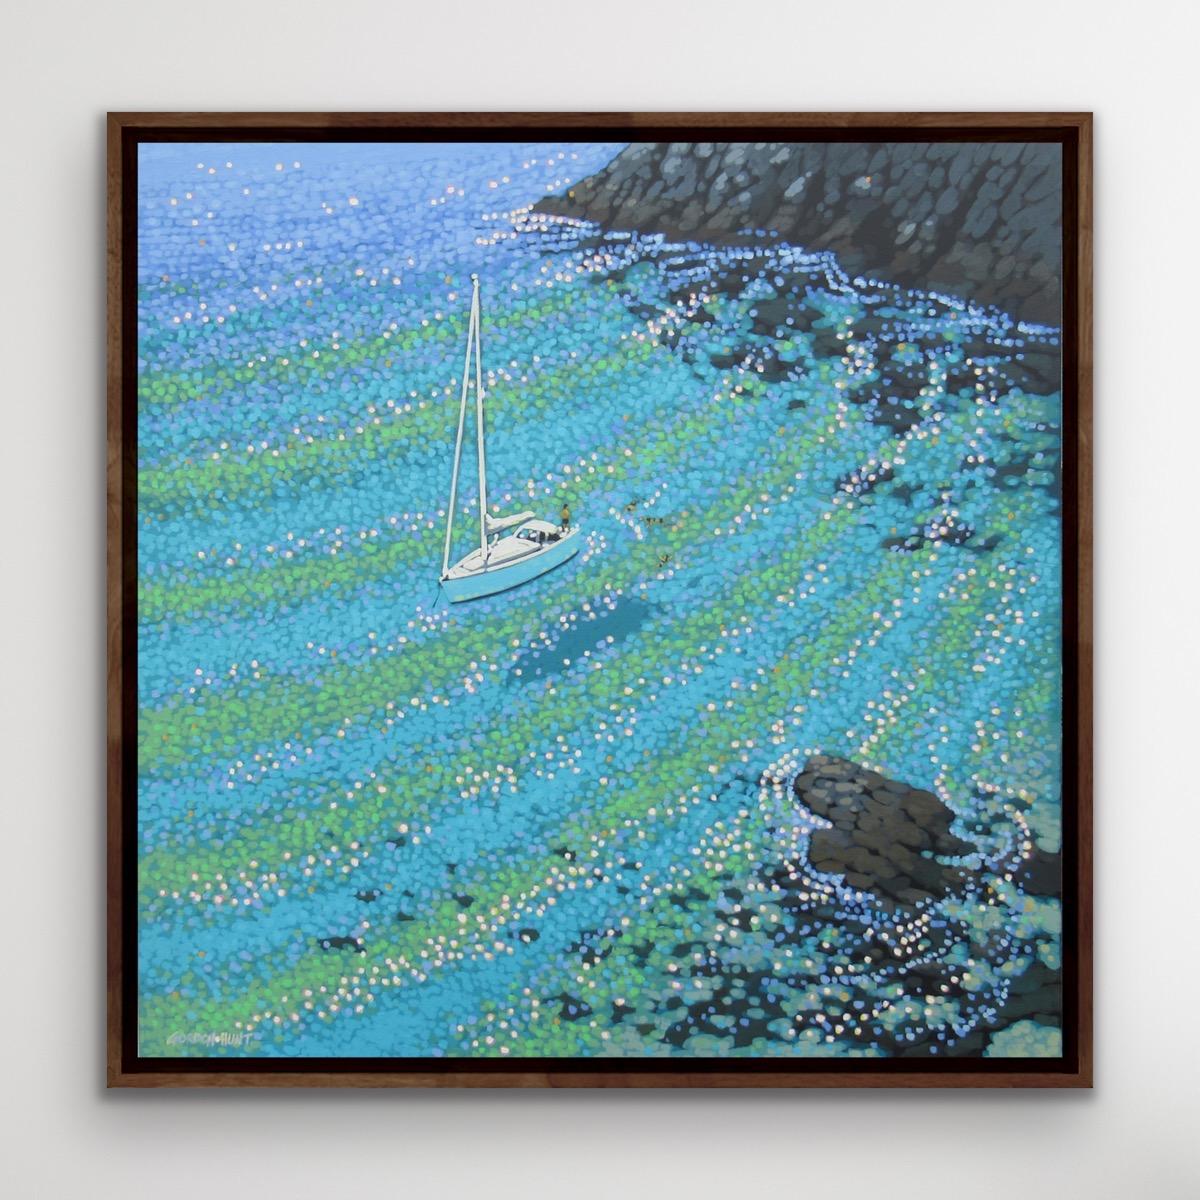 Quiet cove sailing' Is an original painting by Gordon Hunt. It shows a group of friends out sailing who anchor up in a quiet cove to have a swim and a break from sailing. Enjoying the bright clear turquoise waters. Gordon Hunt paints beautiful,